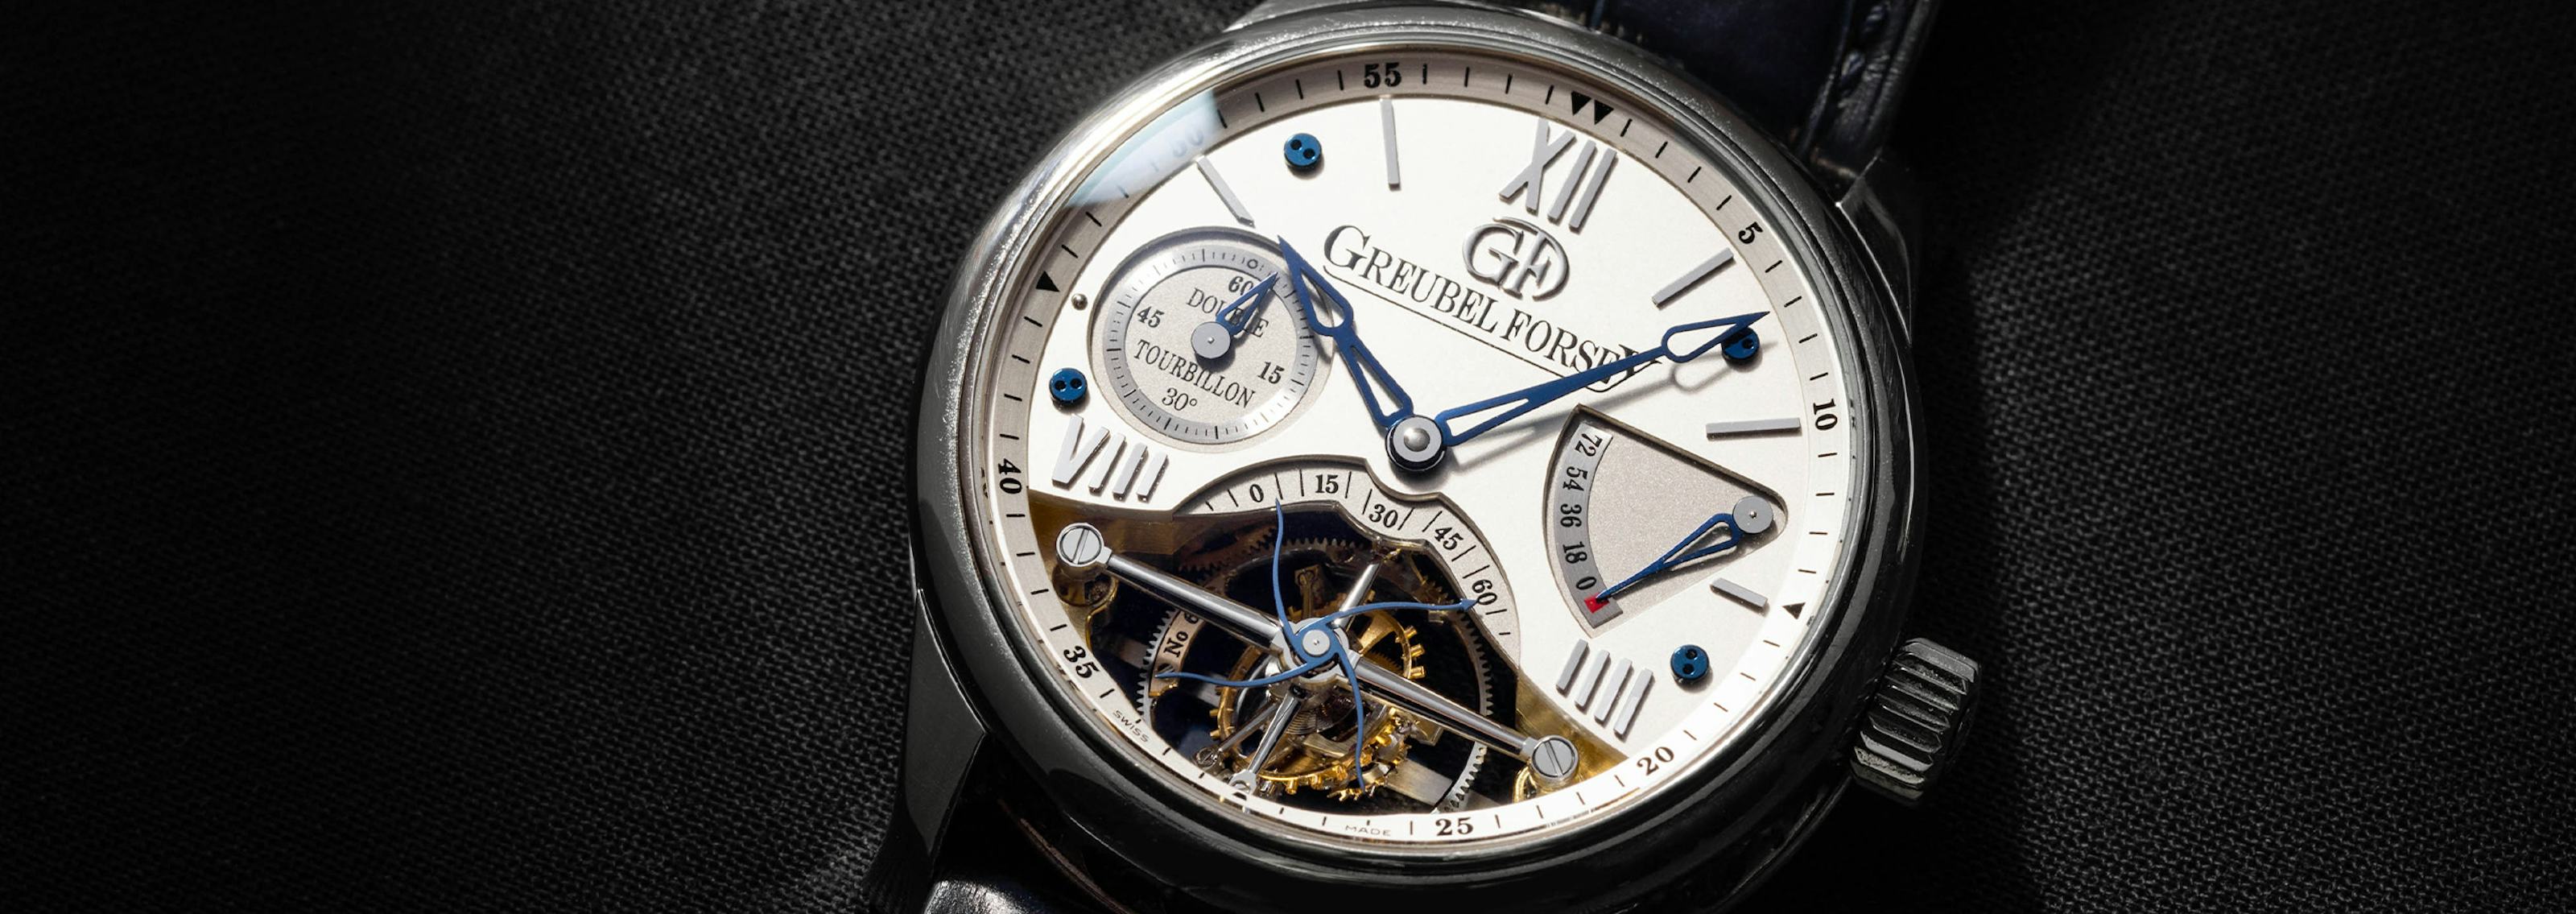 Greubel Forsey: <br>The Masters of Invention